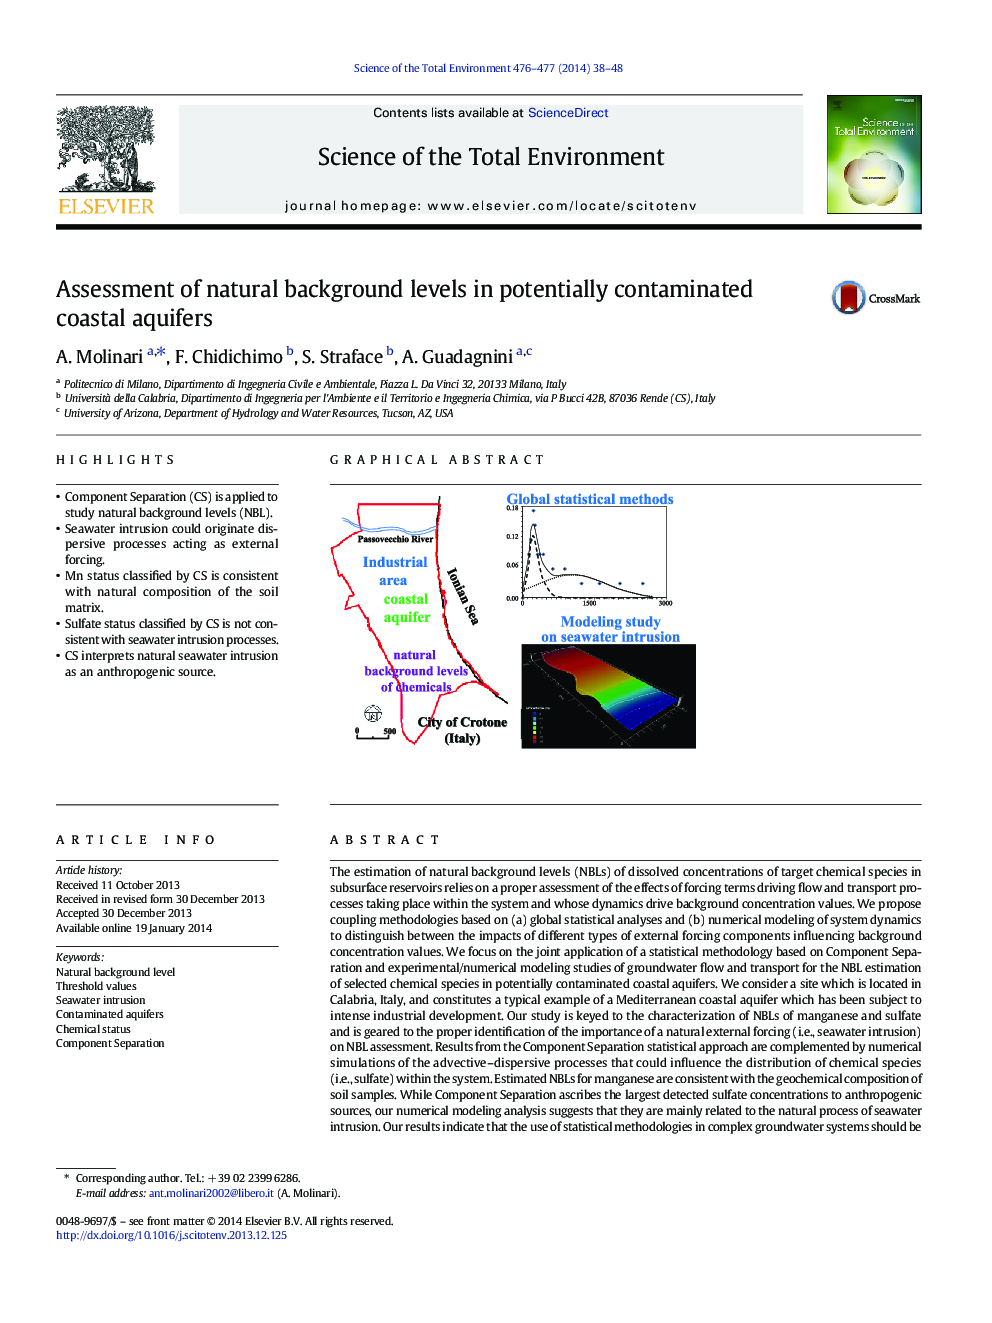 Assessment of natural background levels in potentially contaminated coastal aquifers